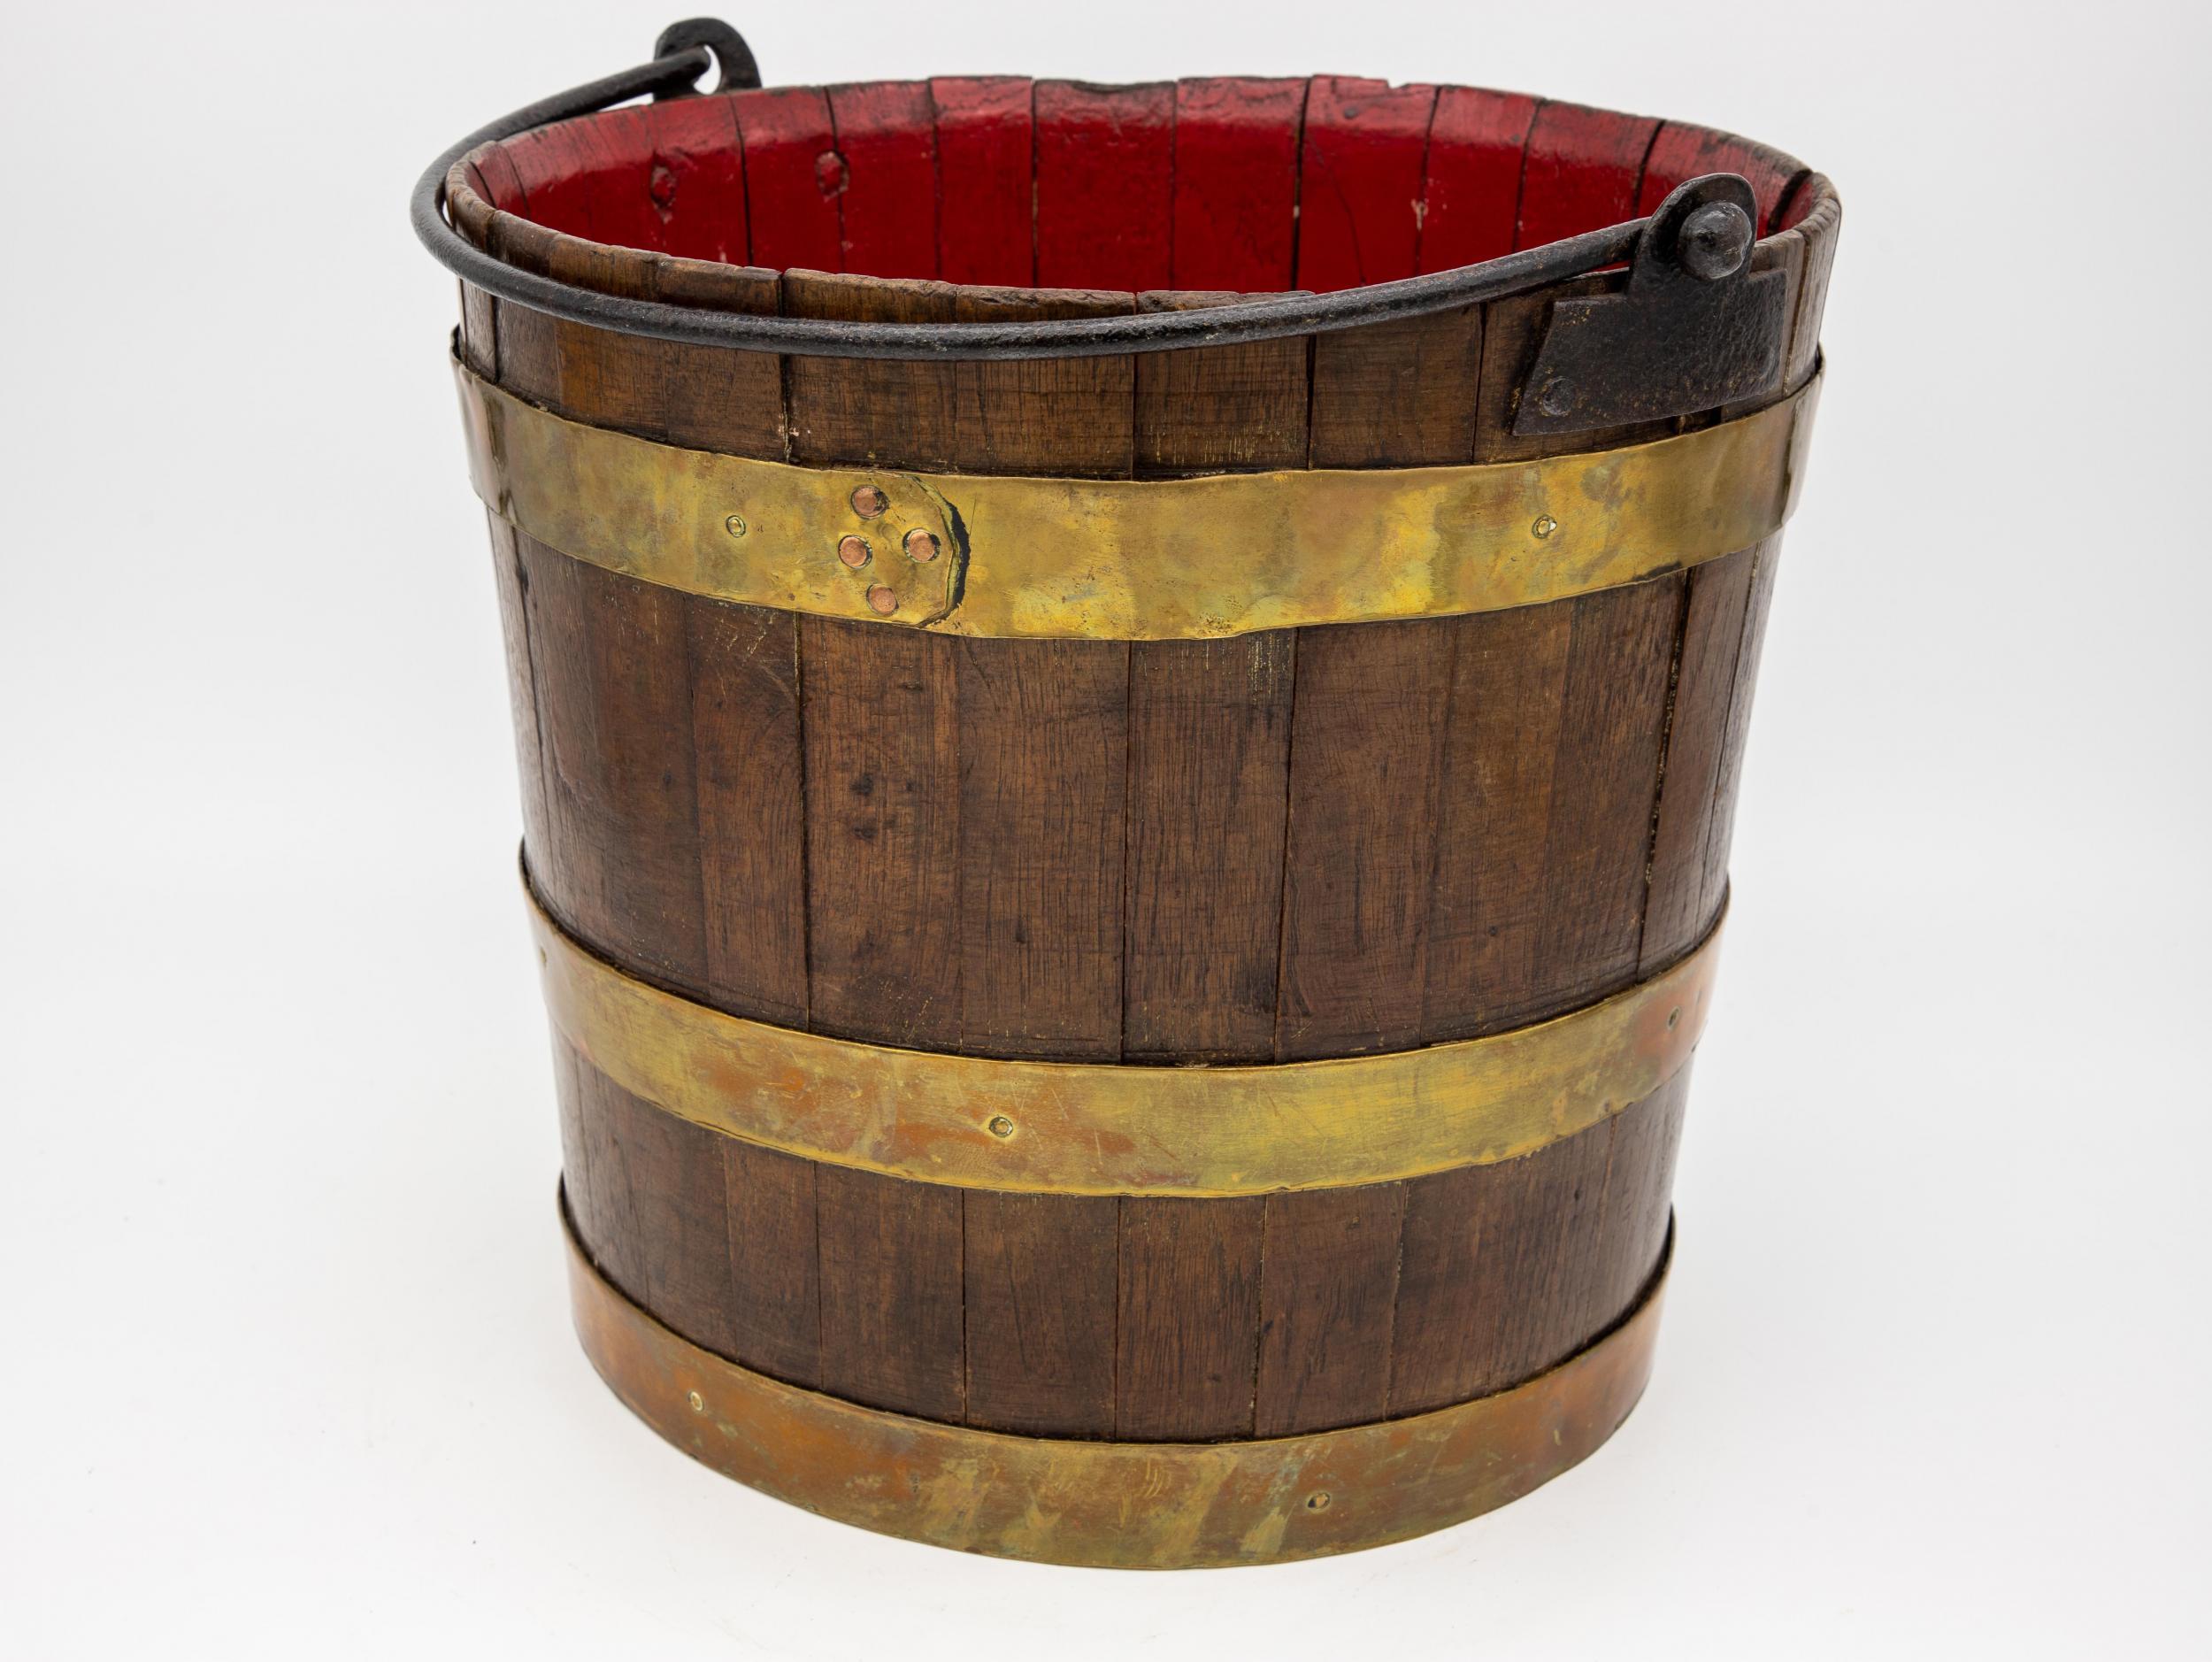 19th Century Wooden Bucket with Red Interior and Brass Accents